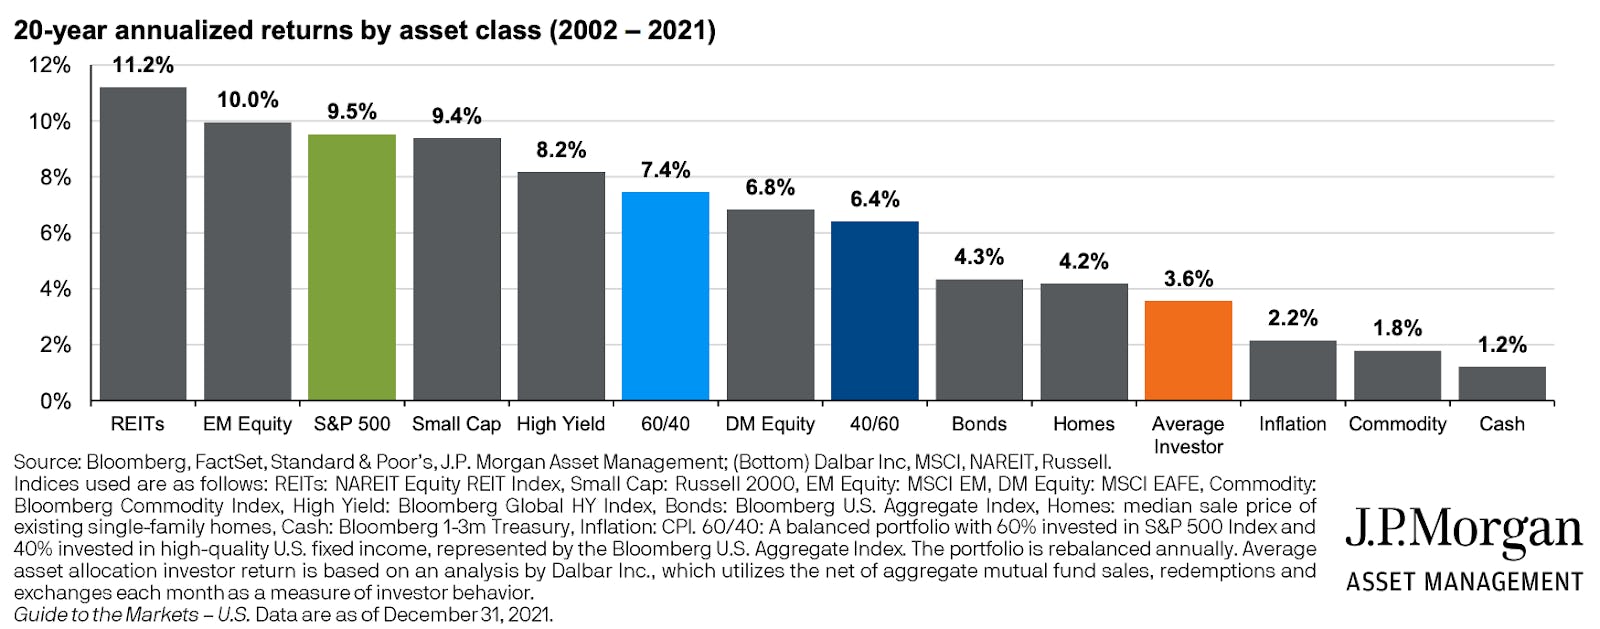 20-year annualised returns by asset class (2002-2021)